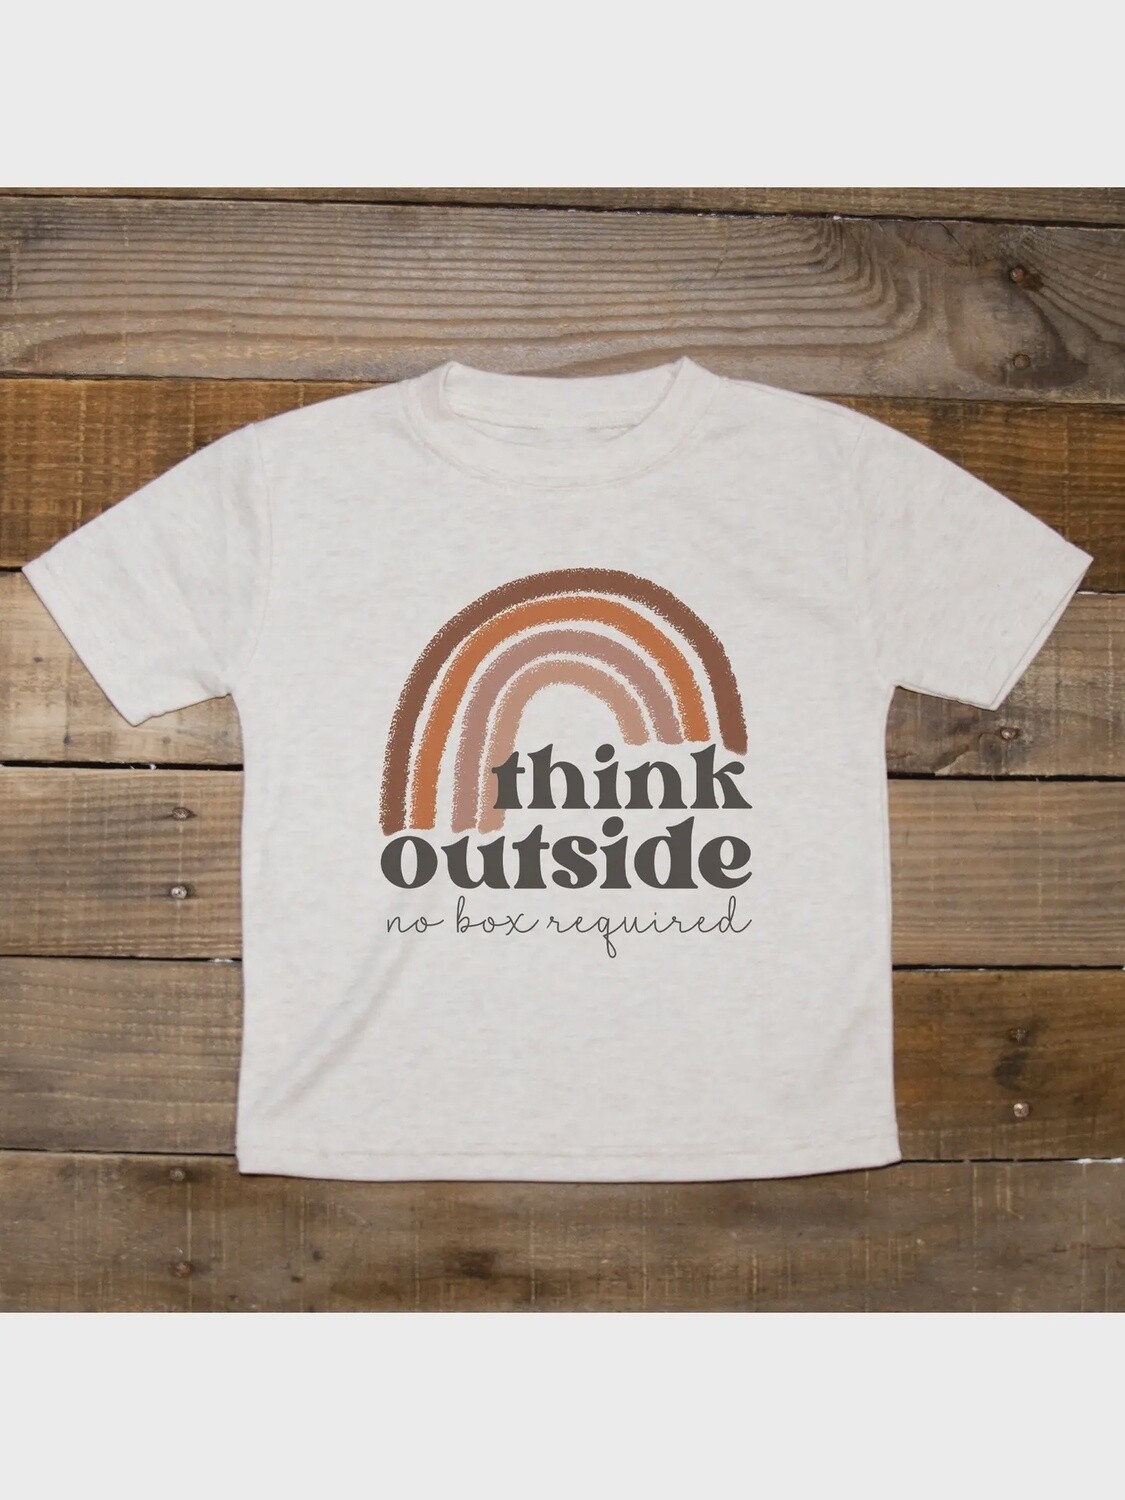 "think outside no box required" Kids Tee